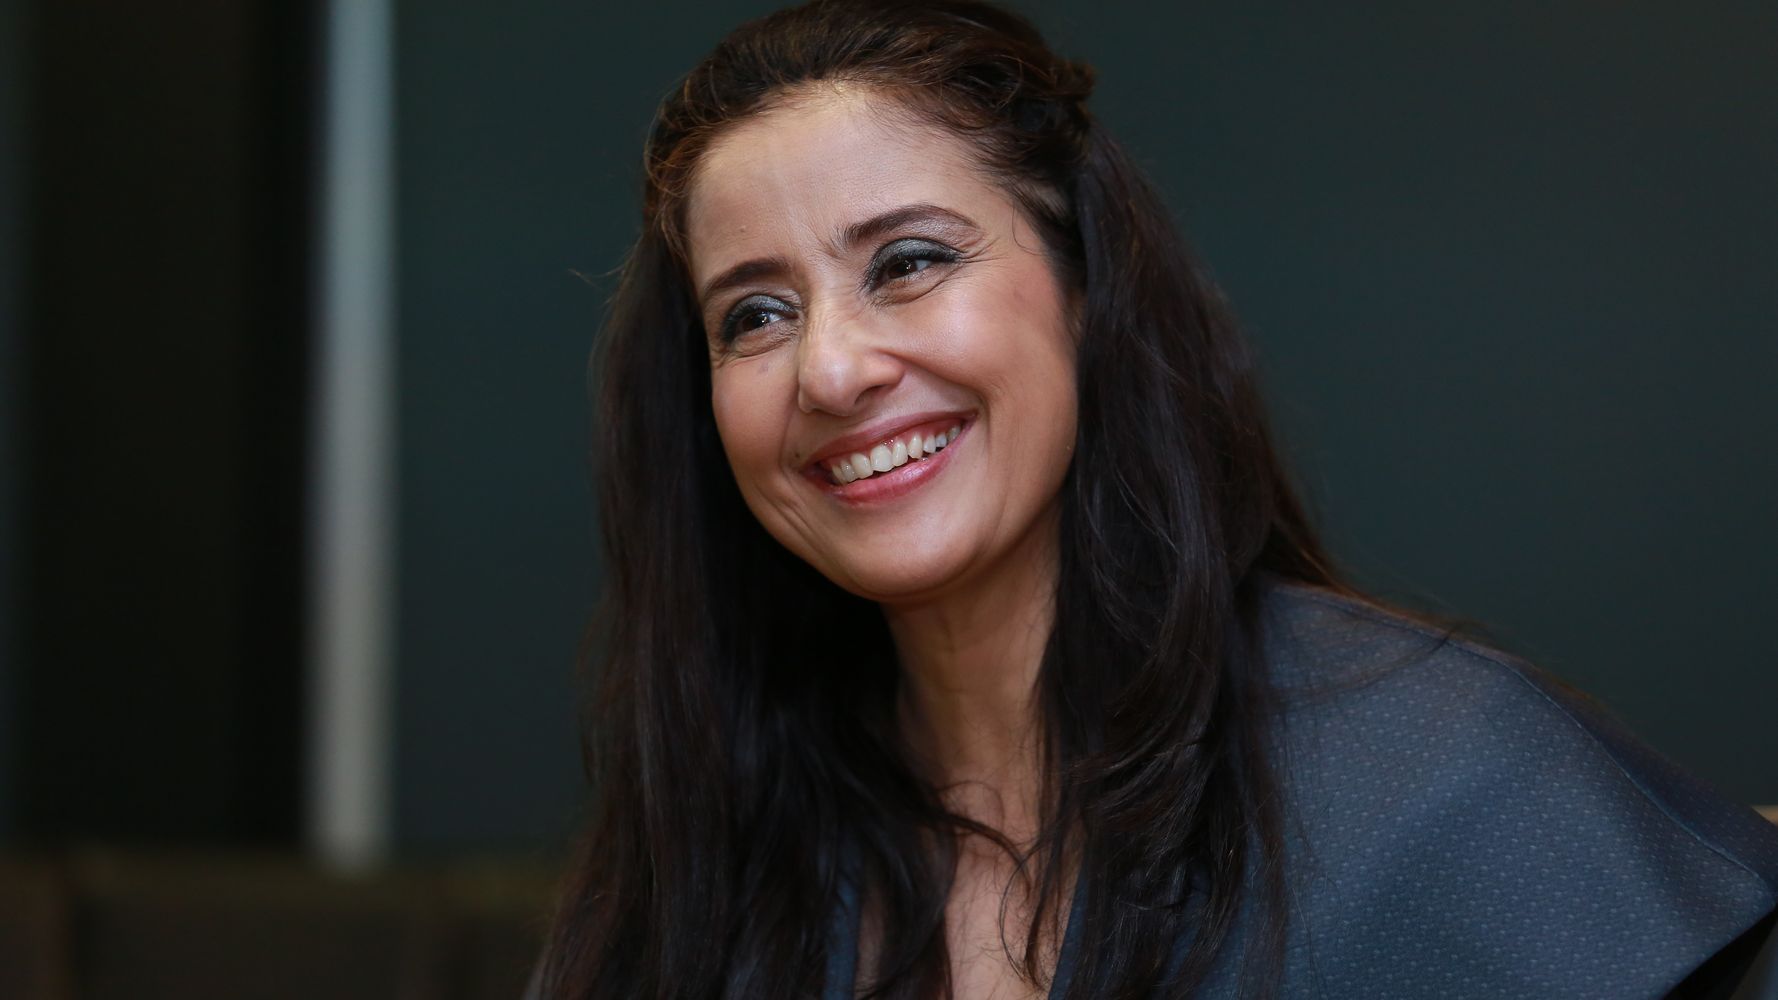 Manisha Koirala Ka Blue Film Xx - Manisha Koirala On The Sexism Of The 90s, Her Second Innings In Bollywood,  And Her Fallout With Subhash Ghai | HuffPost Entertainment